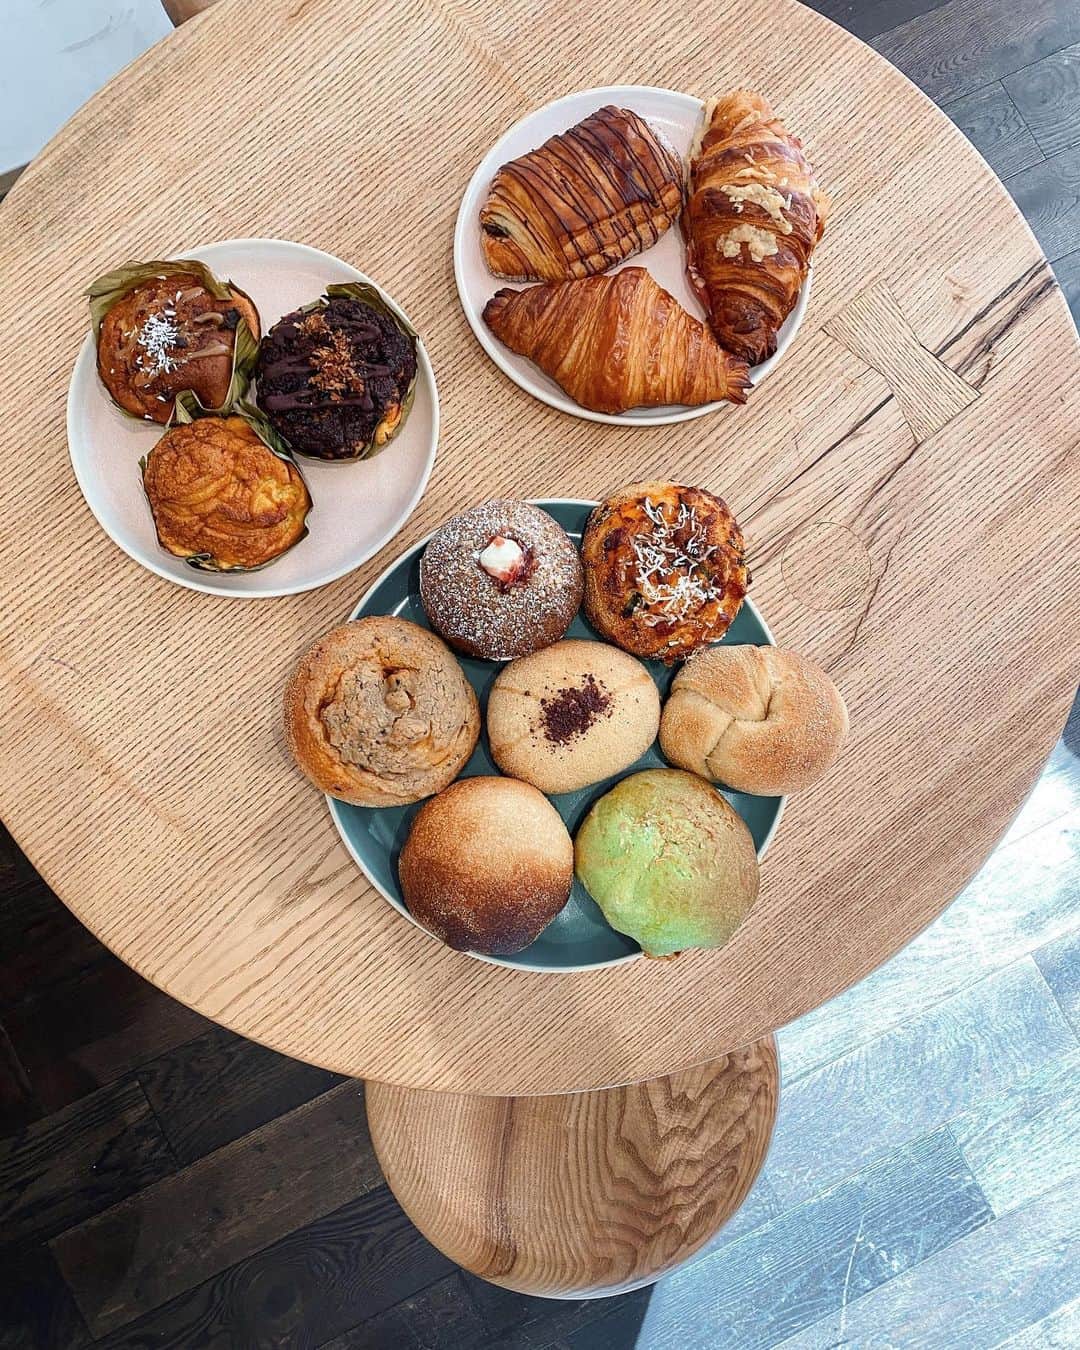 @LONDON | TAG #THISISLONDONさんのインスタグラム写真 - (@LONDON | TAG #THISISLONDONInstagram)「☕️ @MrLondon checking in. Our filming for @GlobalCoffeeFestival took us to London’s best new bakery and cafe of 2020! 😱 This is @k_a_p_i_h_a_n! 🤩 Situated in #Battersea near the park, it’s worth every minute of the pilgrimage to discover what David, Nigel, Rosemary & Plams are doing here. I’m not going to spoil the full back story but suffice to say they have unique approach to their coffee and baking which needs to be experienced. You’ll have to wait until 30th October to watch the @globalcoffeefestival live stream for the full story! But it will be sweet and it will be beautiful! ☺️❤️🙏🏼 Massive respect! ☕️💪🏼👌🏼😱 They’re presently open on Saturdays only but you can pre-order the pastries and cakes online Monday to Friday, and guarantee collection on Saturday. Show them some love and thank us later! 💪🏼💪🏼❤️❤️  ___________________________________________  #thisislondon #lovelondon #london #londra #londonlife #londres #uk #visitlondon #british #🇬🇧 #londoncoffeeshops #londoncoffee #kapihan #batterseapark #londonbaker #londonbakery #londonreviewed」9月12日 23時01分 - london